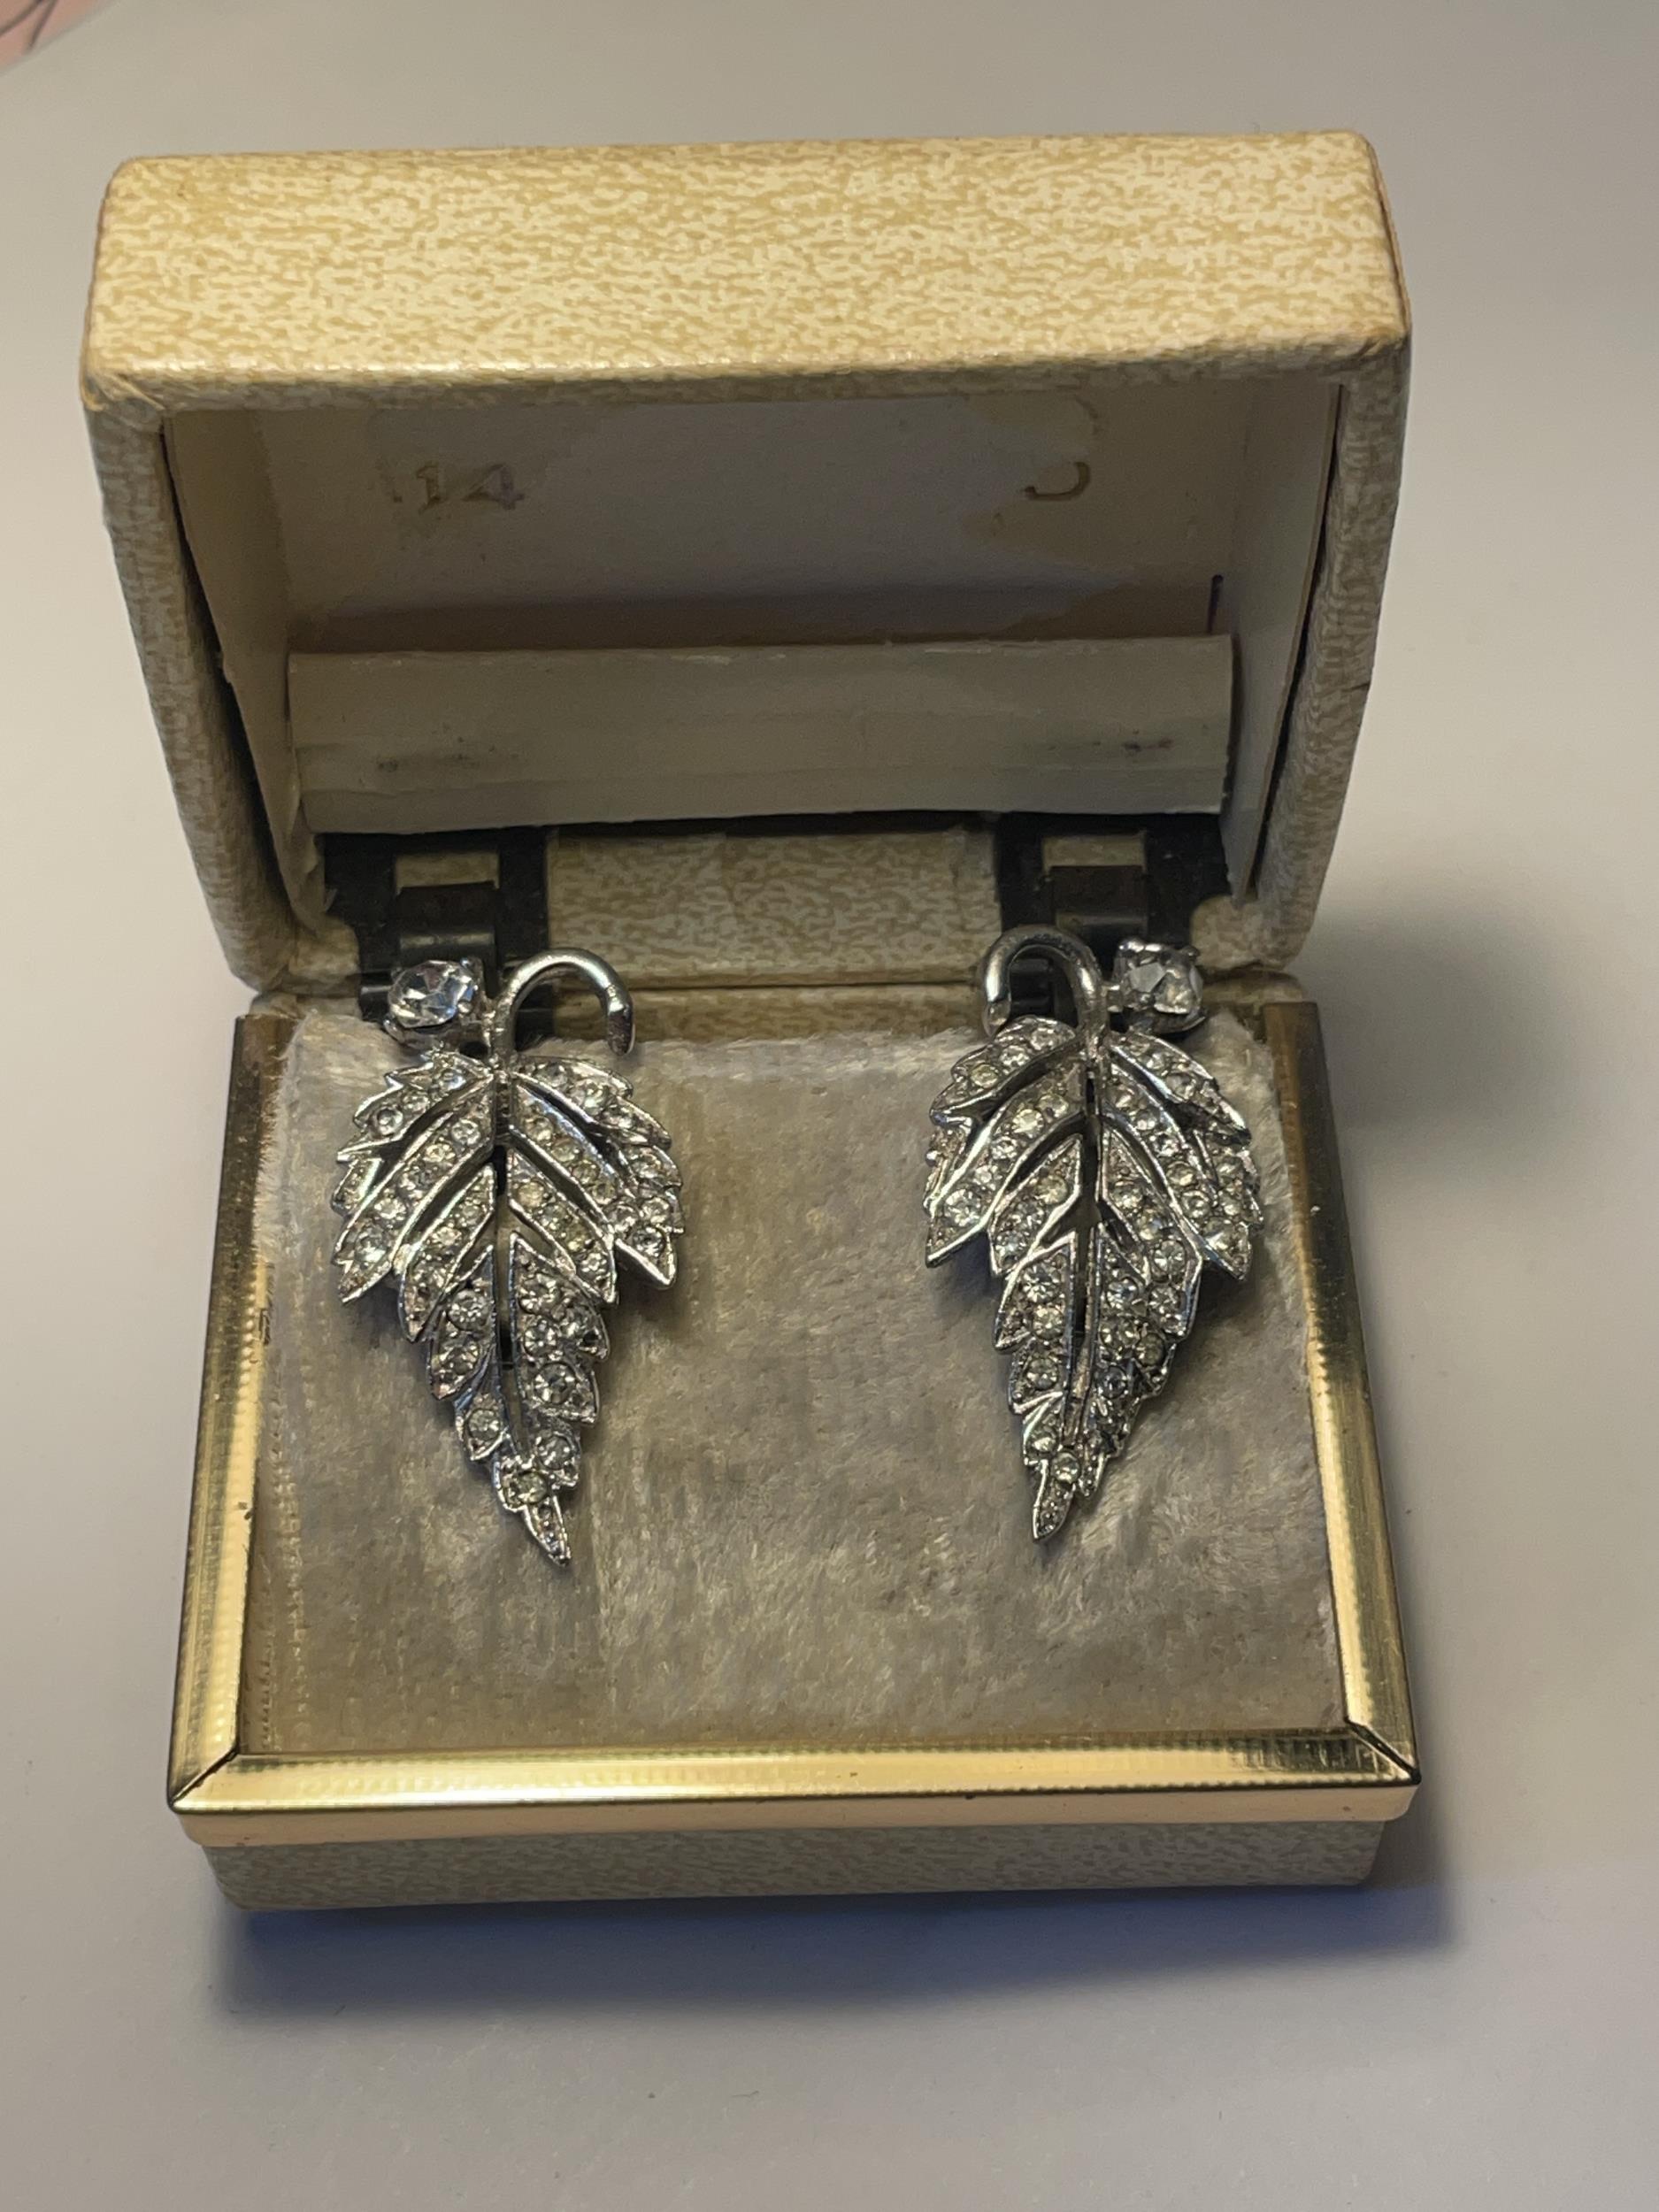 A PAIR OF 1040'S METAL RHODIUM AND CLEAR STONE EARRINGS IN A LEAF DESIGN WITH PRESENTATION BOX